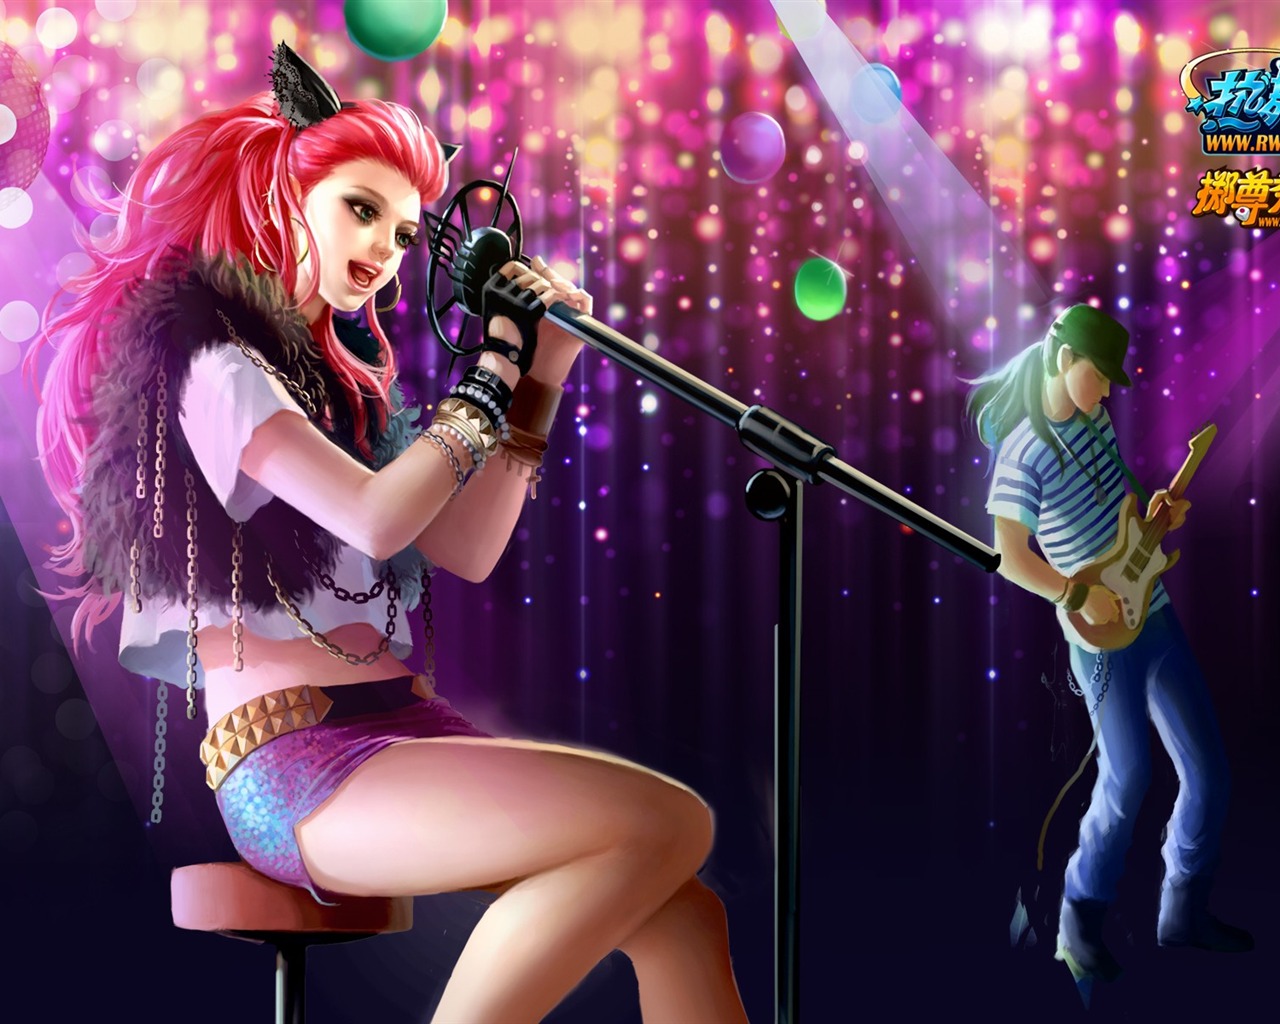 Online game Hot Dance Party II official wallpapers #38 - 1280x1024